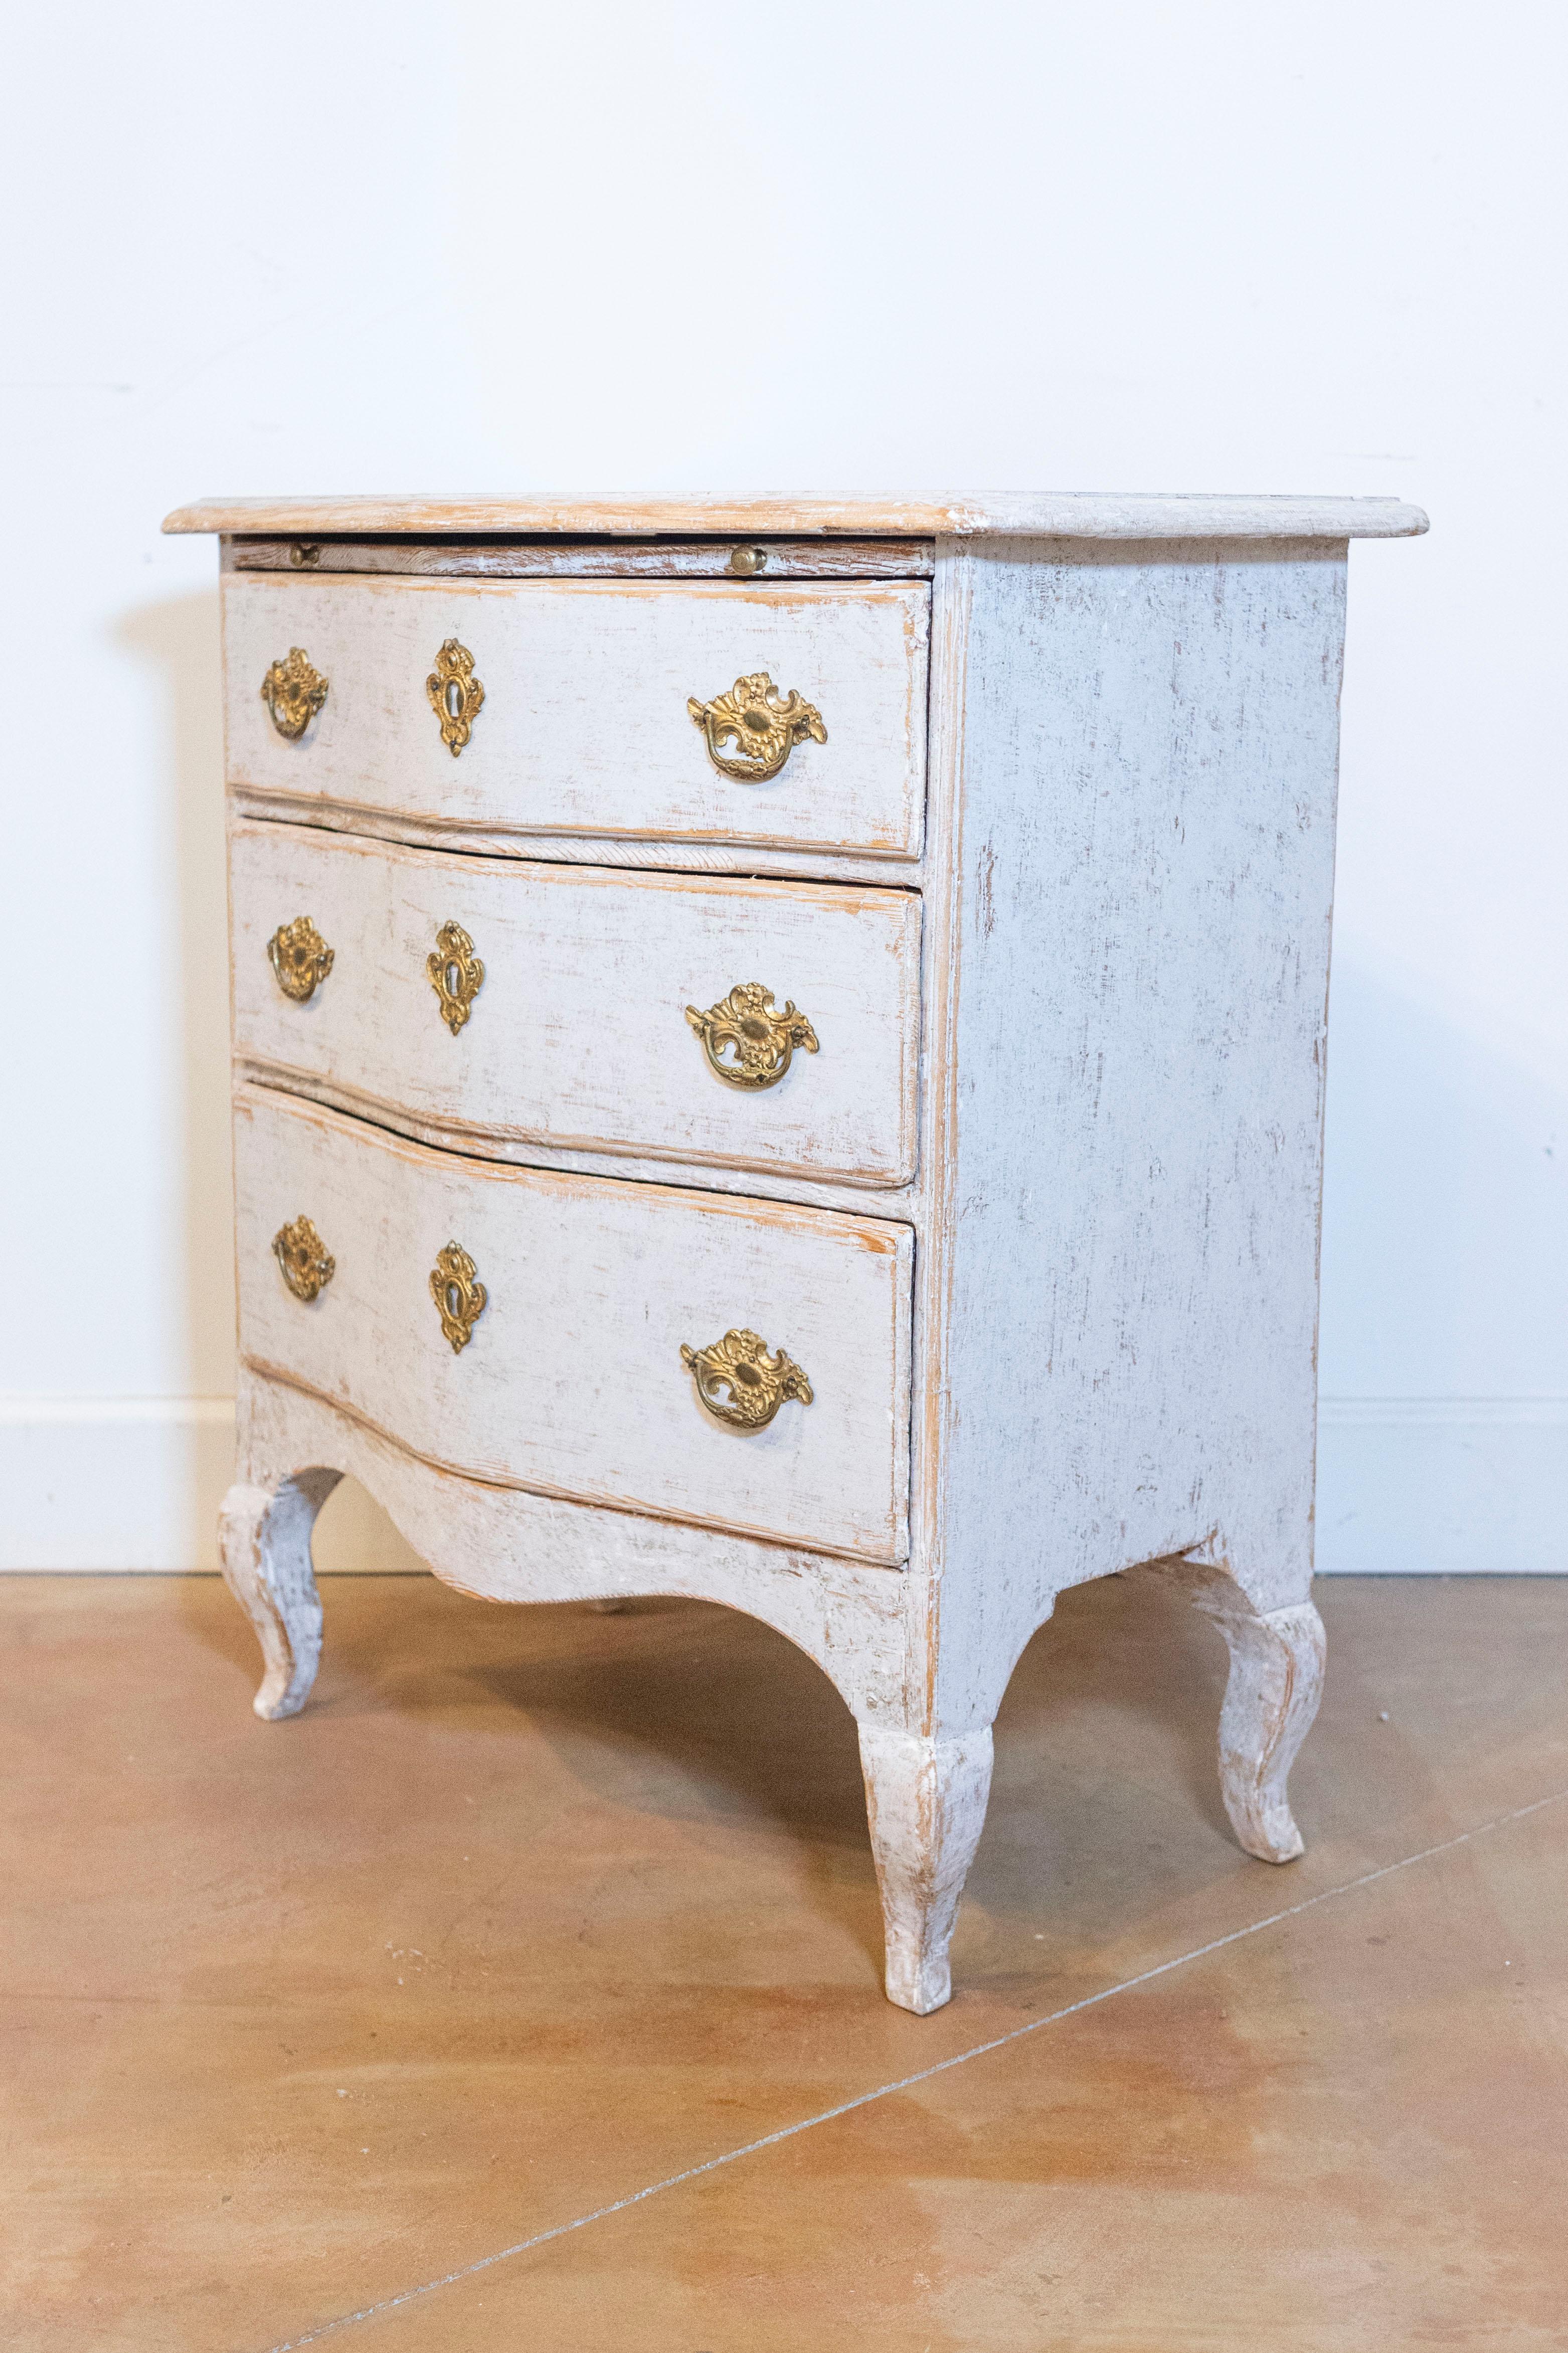 1760s Rococo Period Swedish Light Grey Painted Chest of Drawers with Pull-Out In Good Condition For Sale In Atlanta, GA